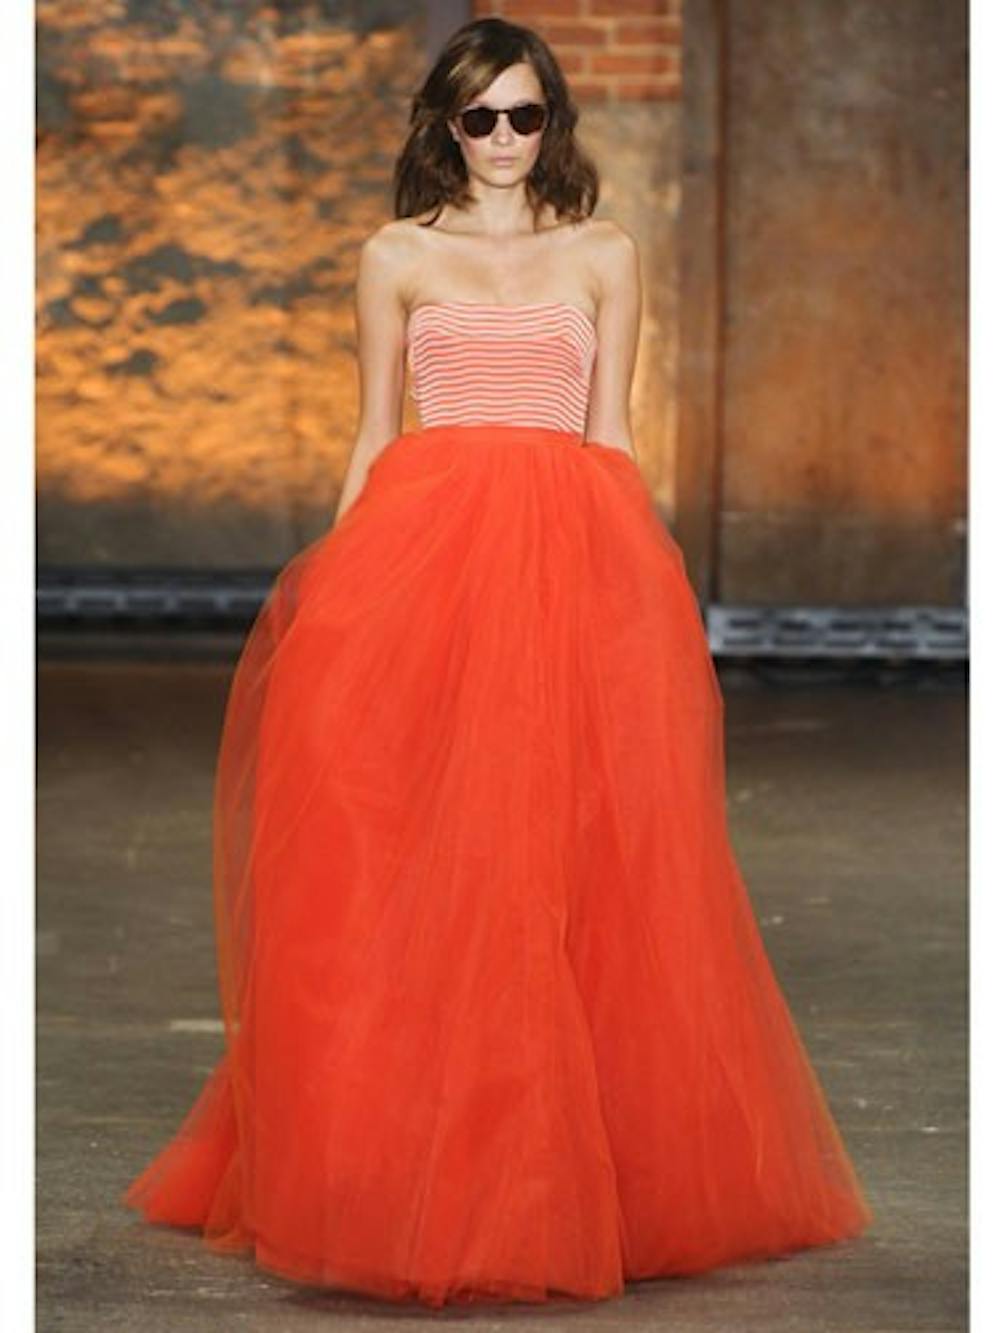 Christian Siriano for Spring/Summer 2012. Photo from Marieclaire.com. 